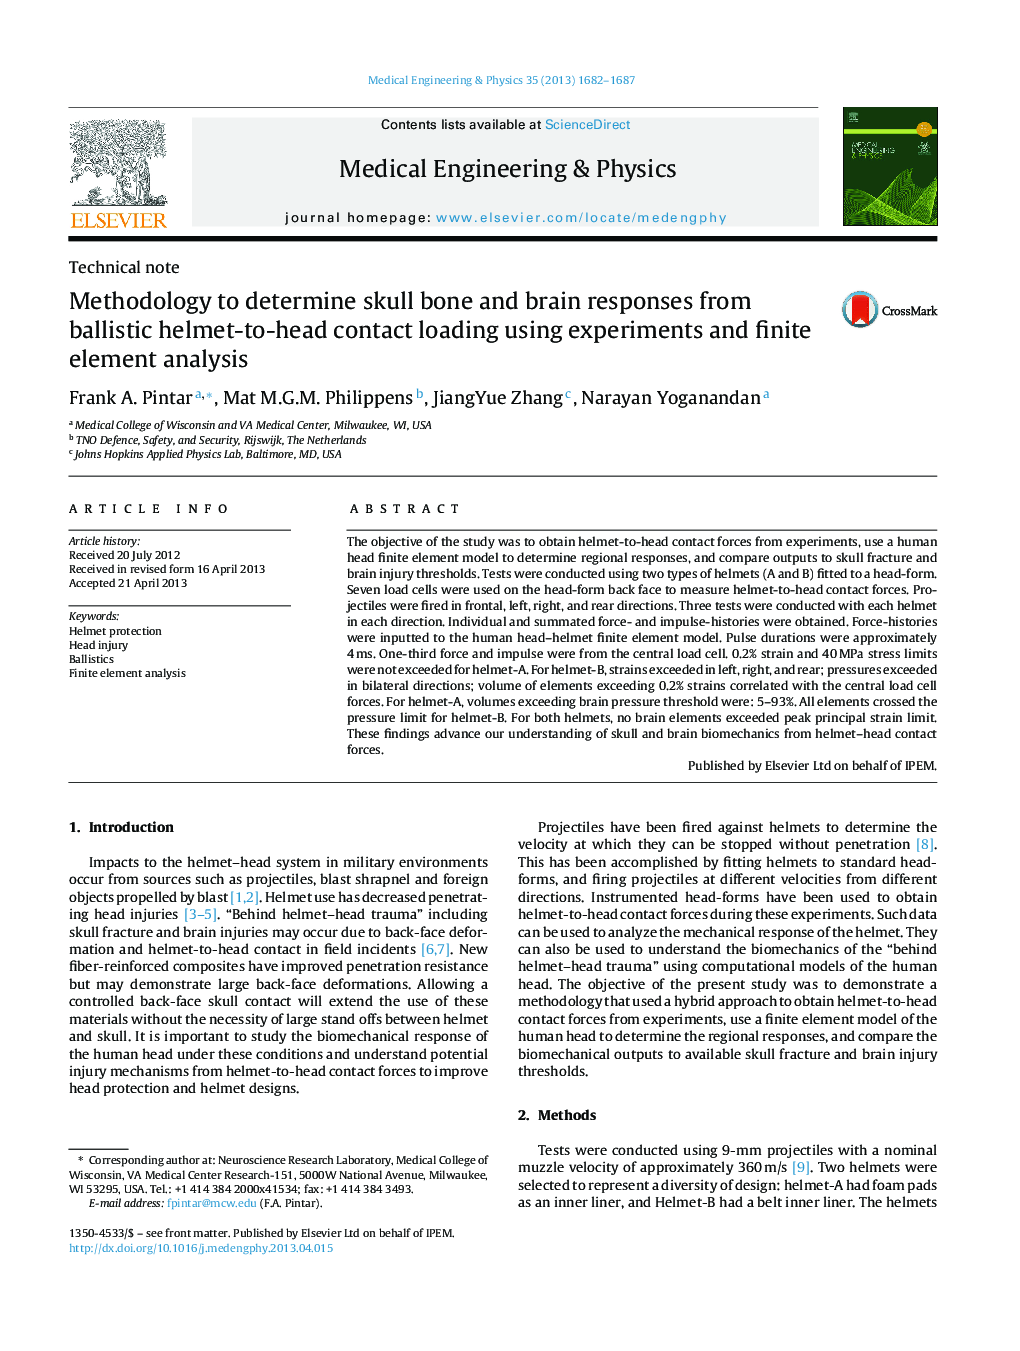 Methodology to determine skull bone and brain responses from ballistic helmet-to-head contact loading using experiments and finite element analysis